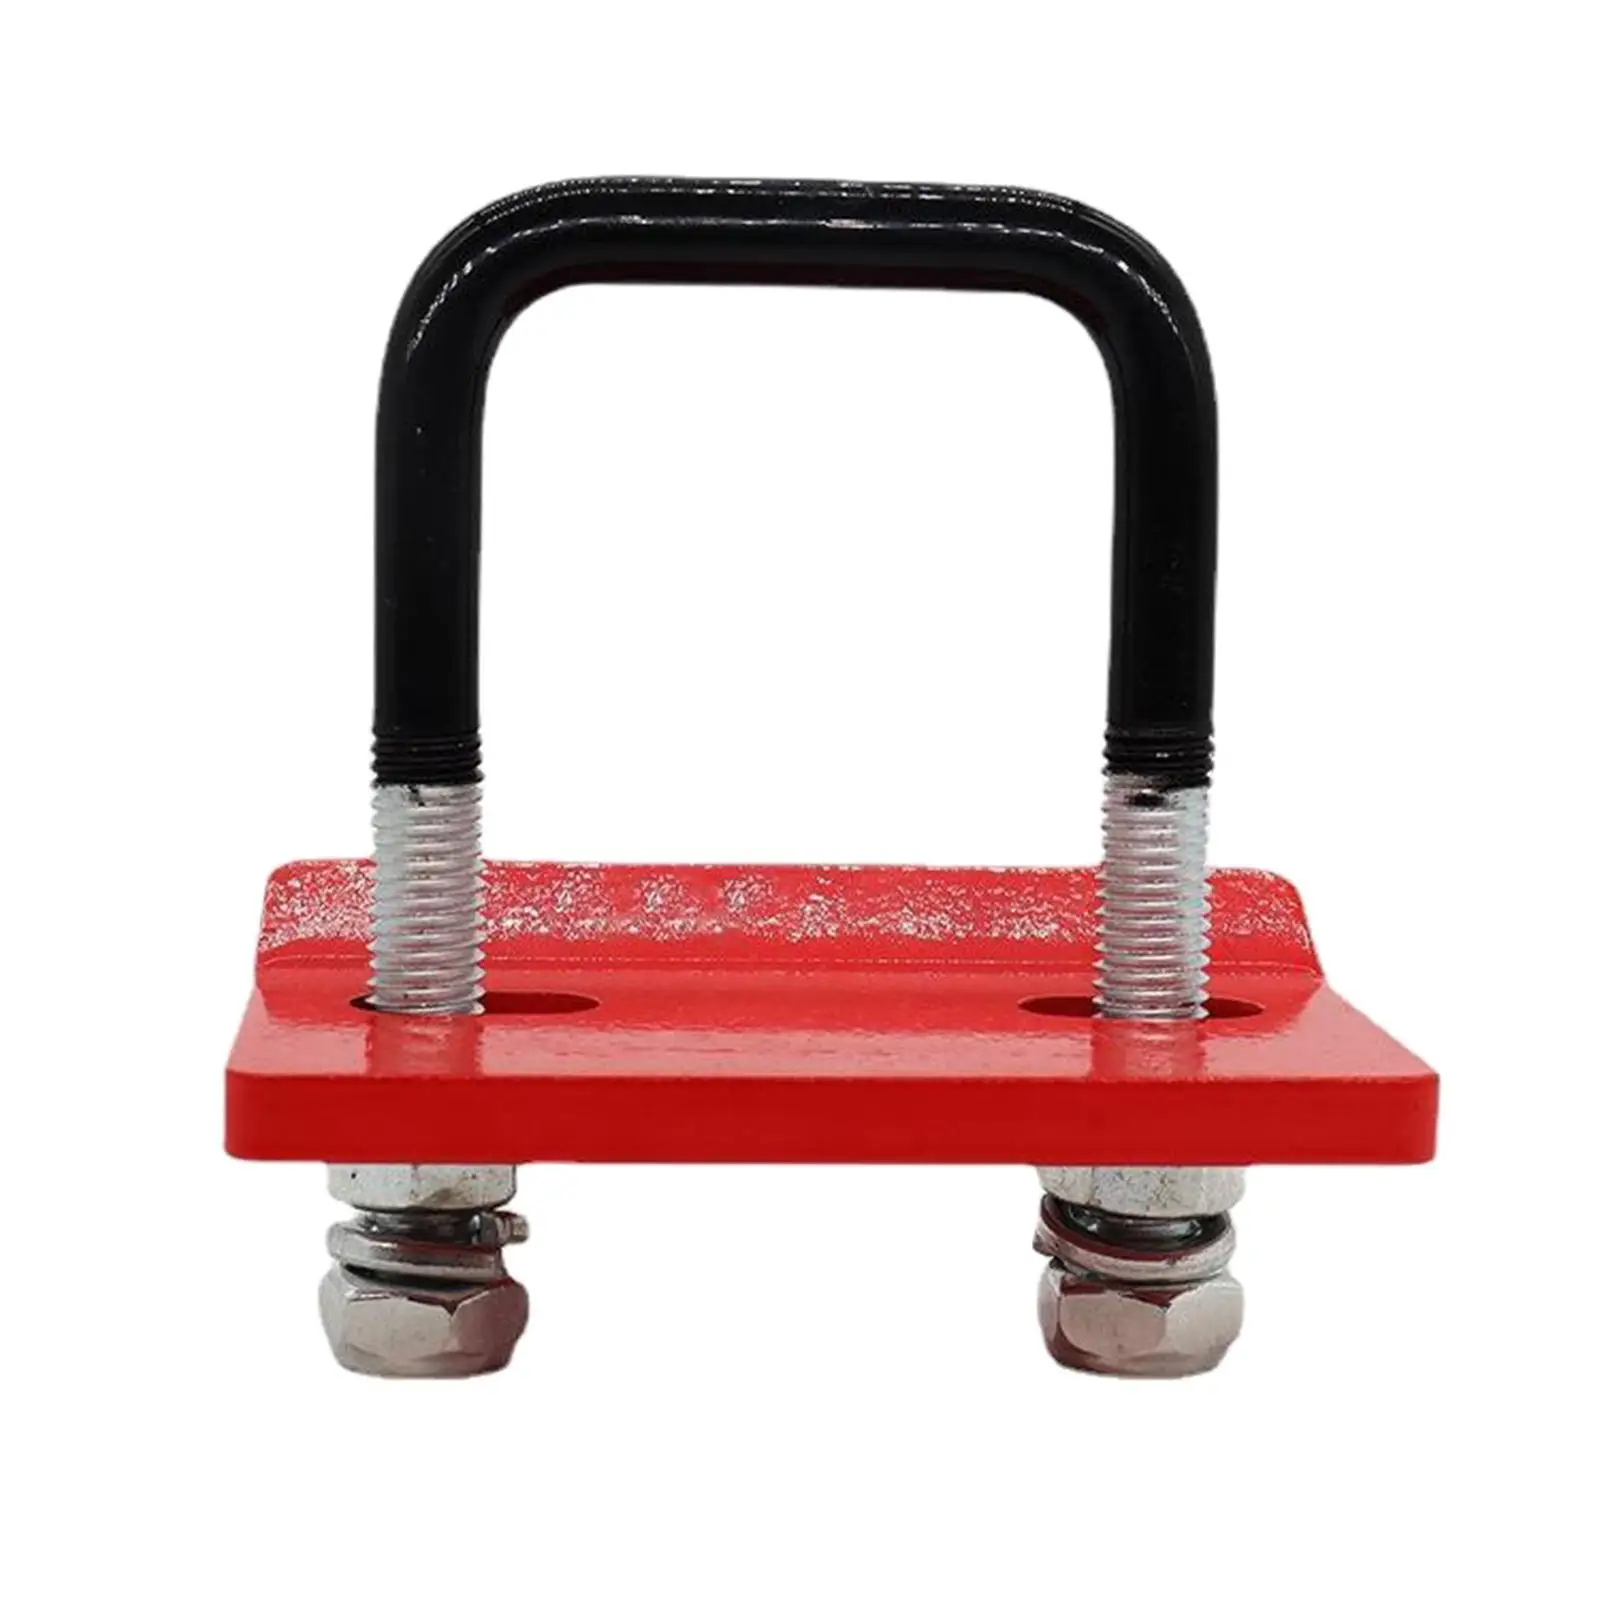 Hitch Tightener Lock Down Tow Clamp for Hitch Tray Bike Rack Boat